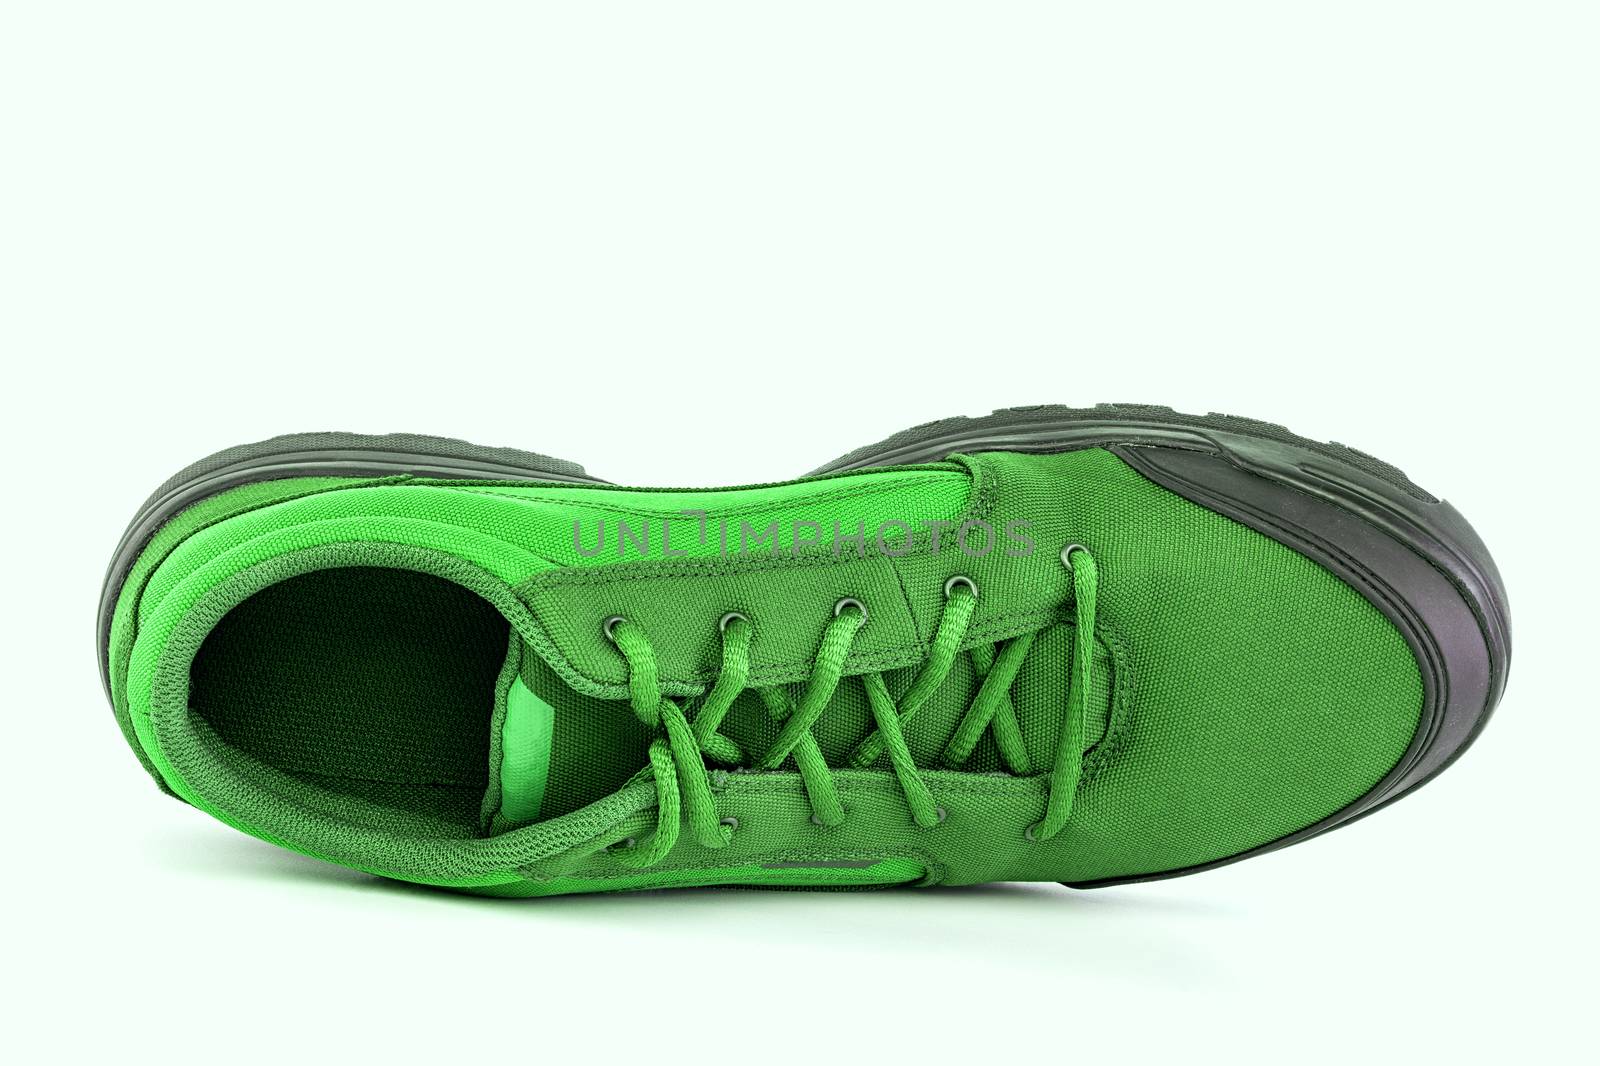 right cheap green hiking or hunting shoe isolated on white background.